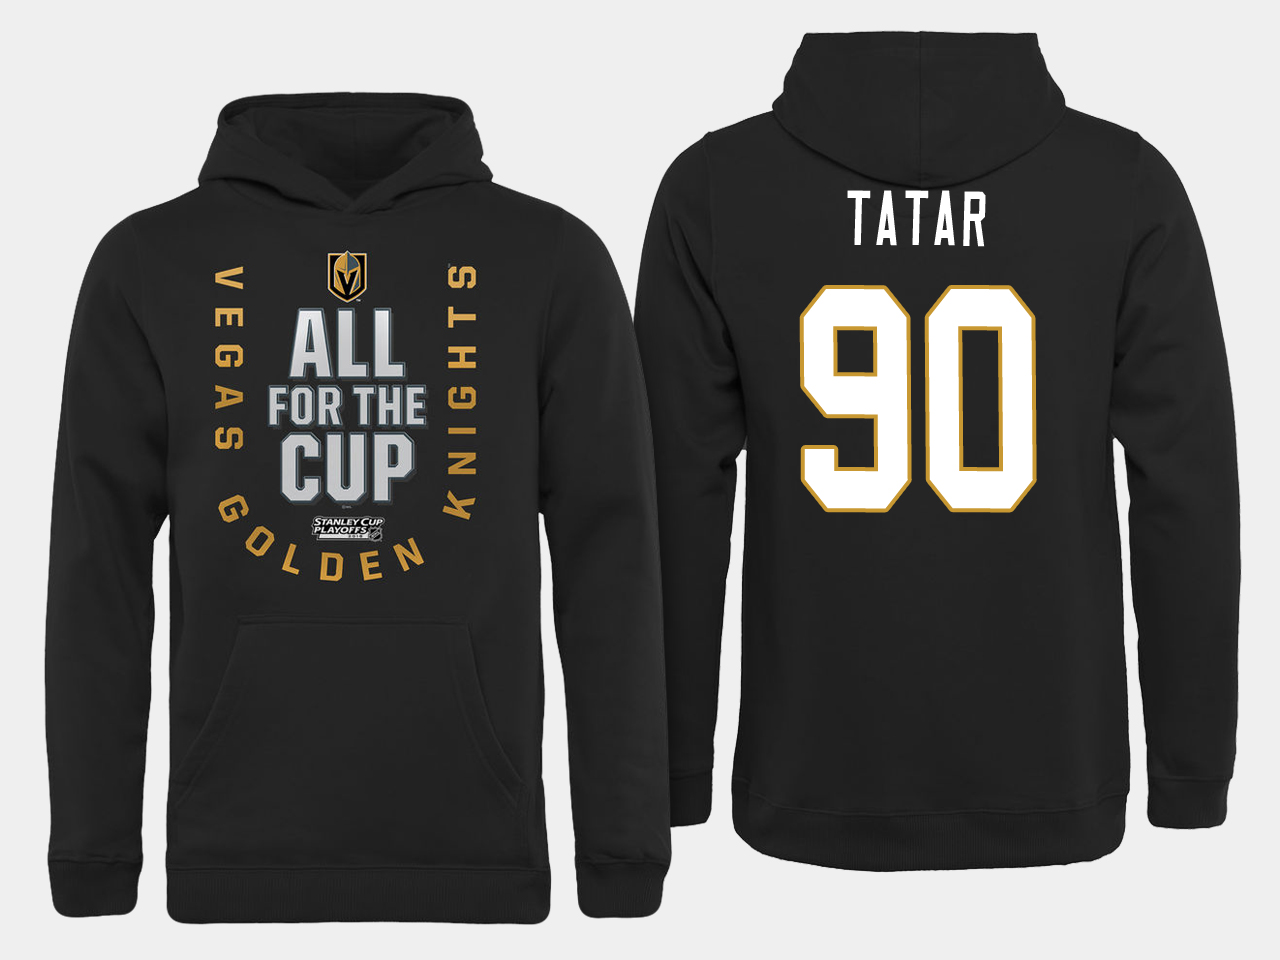 Men NHL Vegas Golden Knights #90 Tatar All for the Cup hoodie->more nhl jerseys->NHL Jersey